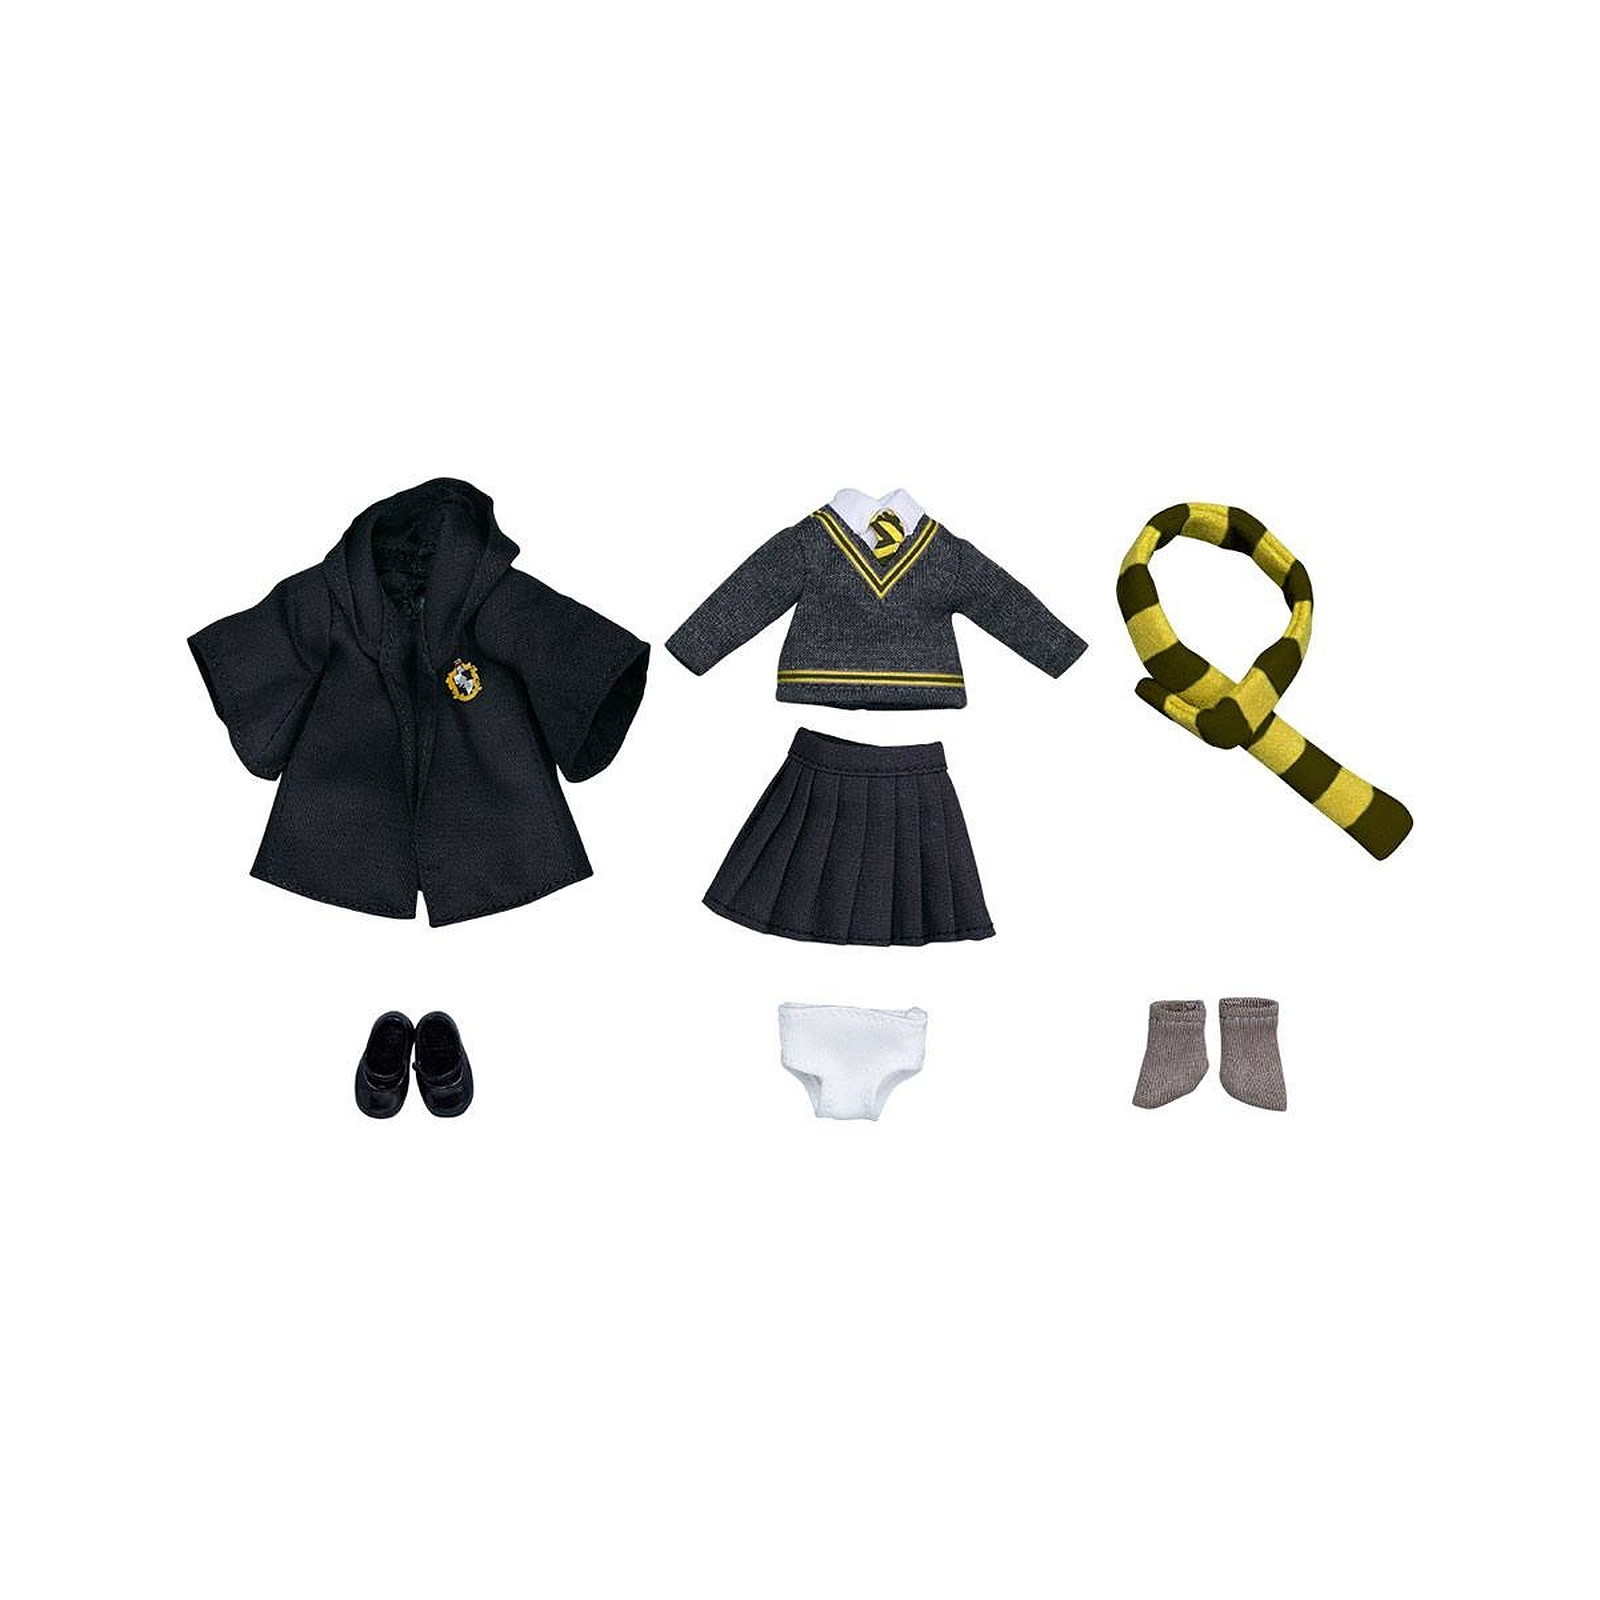 Harry Potter - Accessoires pour figurines Nendoroid Doll Outfit Set (Hufflepuff Uniform - Girl) - Figurines Good Smile Company